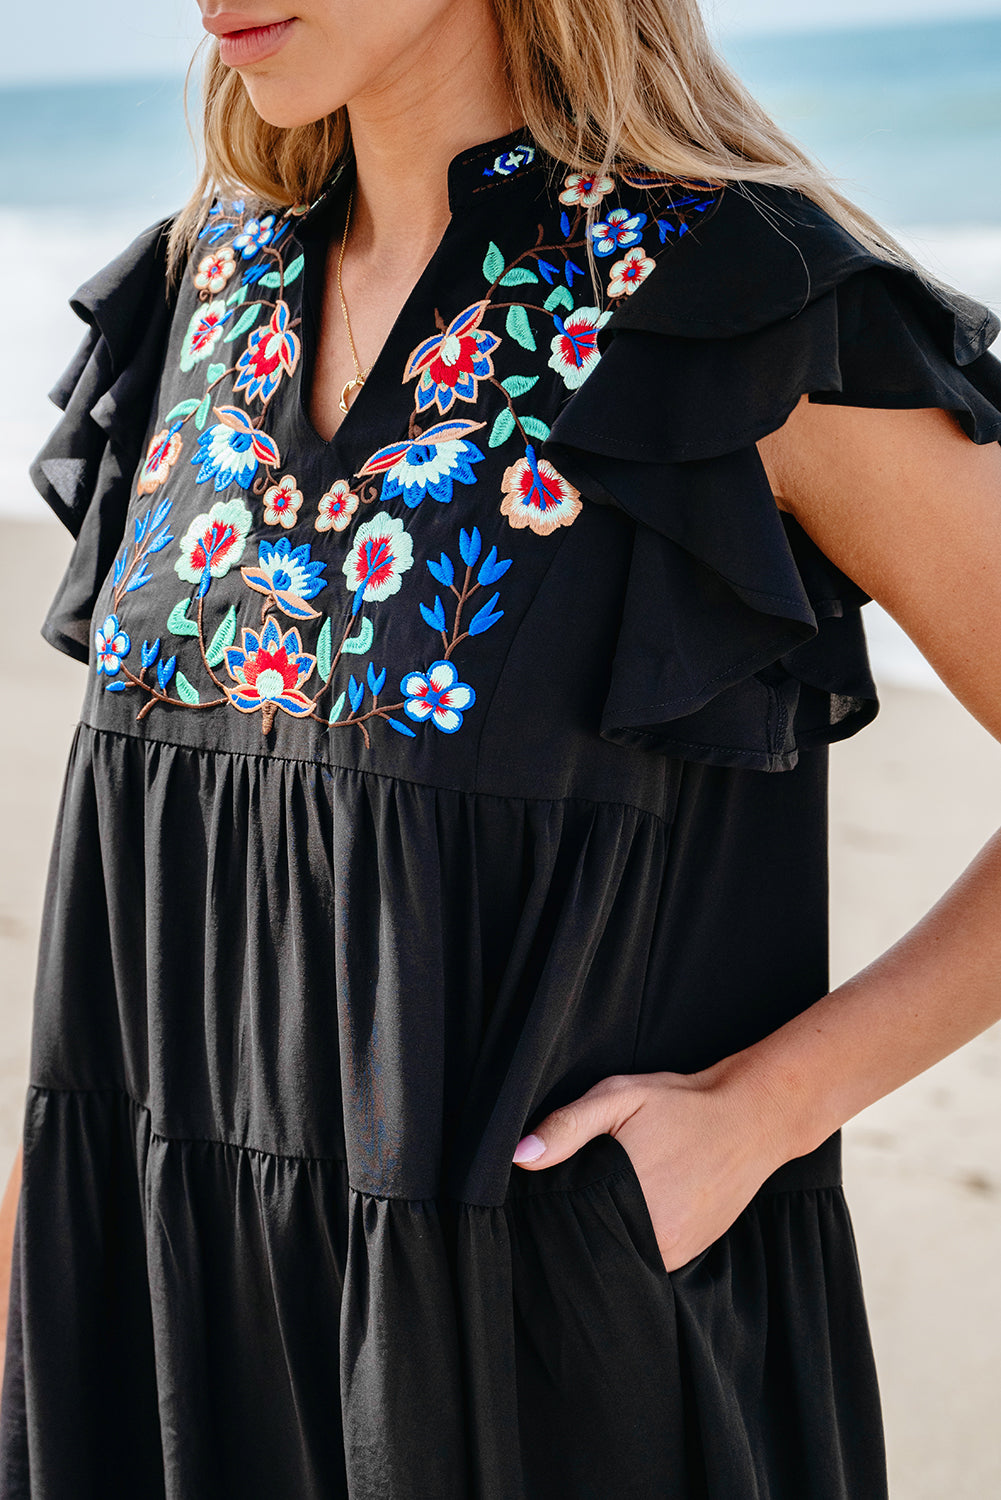 Black Floral Embroidered Tiered Ruffled Mini Dress Blue Zone Planet